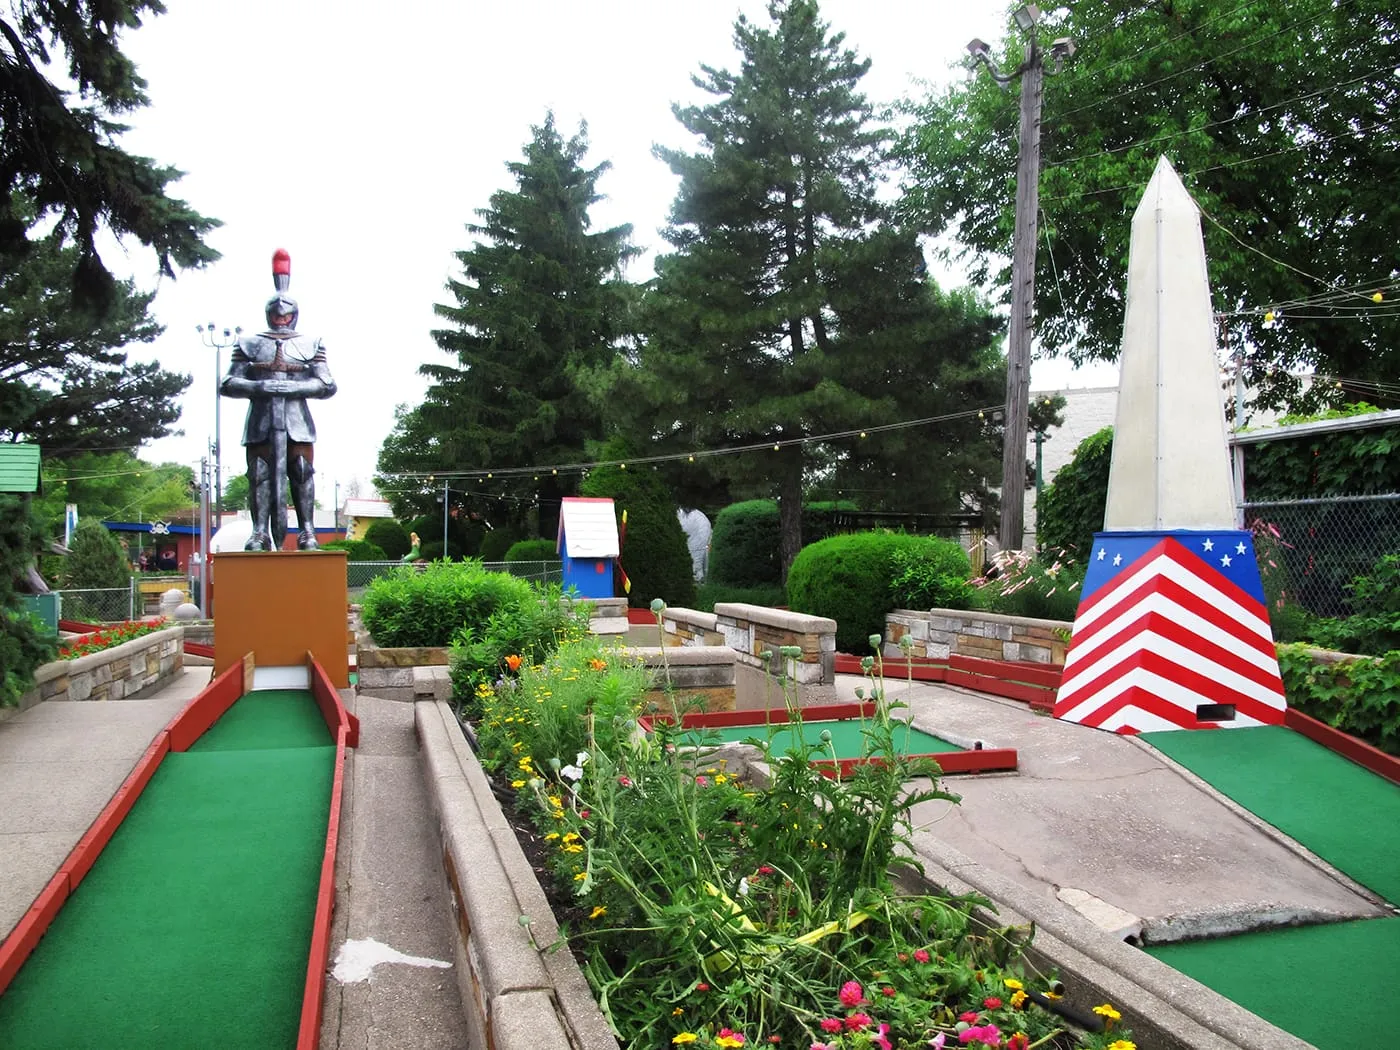 Knight at the golf course at Novelty Golf in Lincolnwood, Illinois.